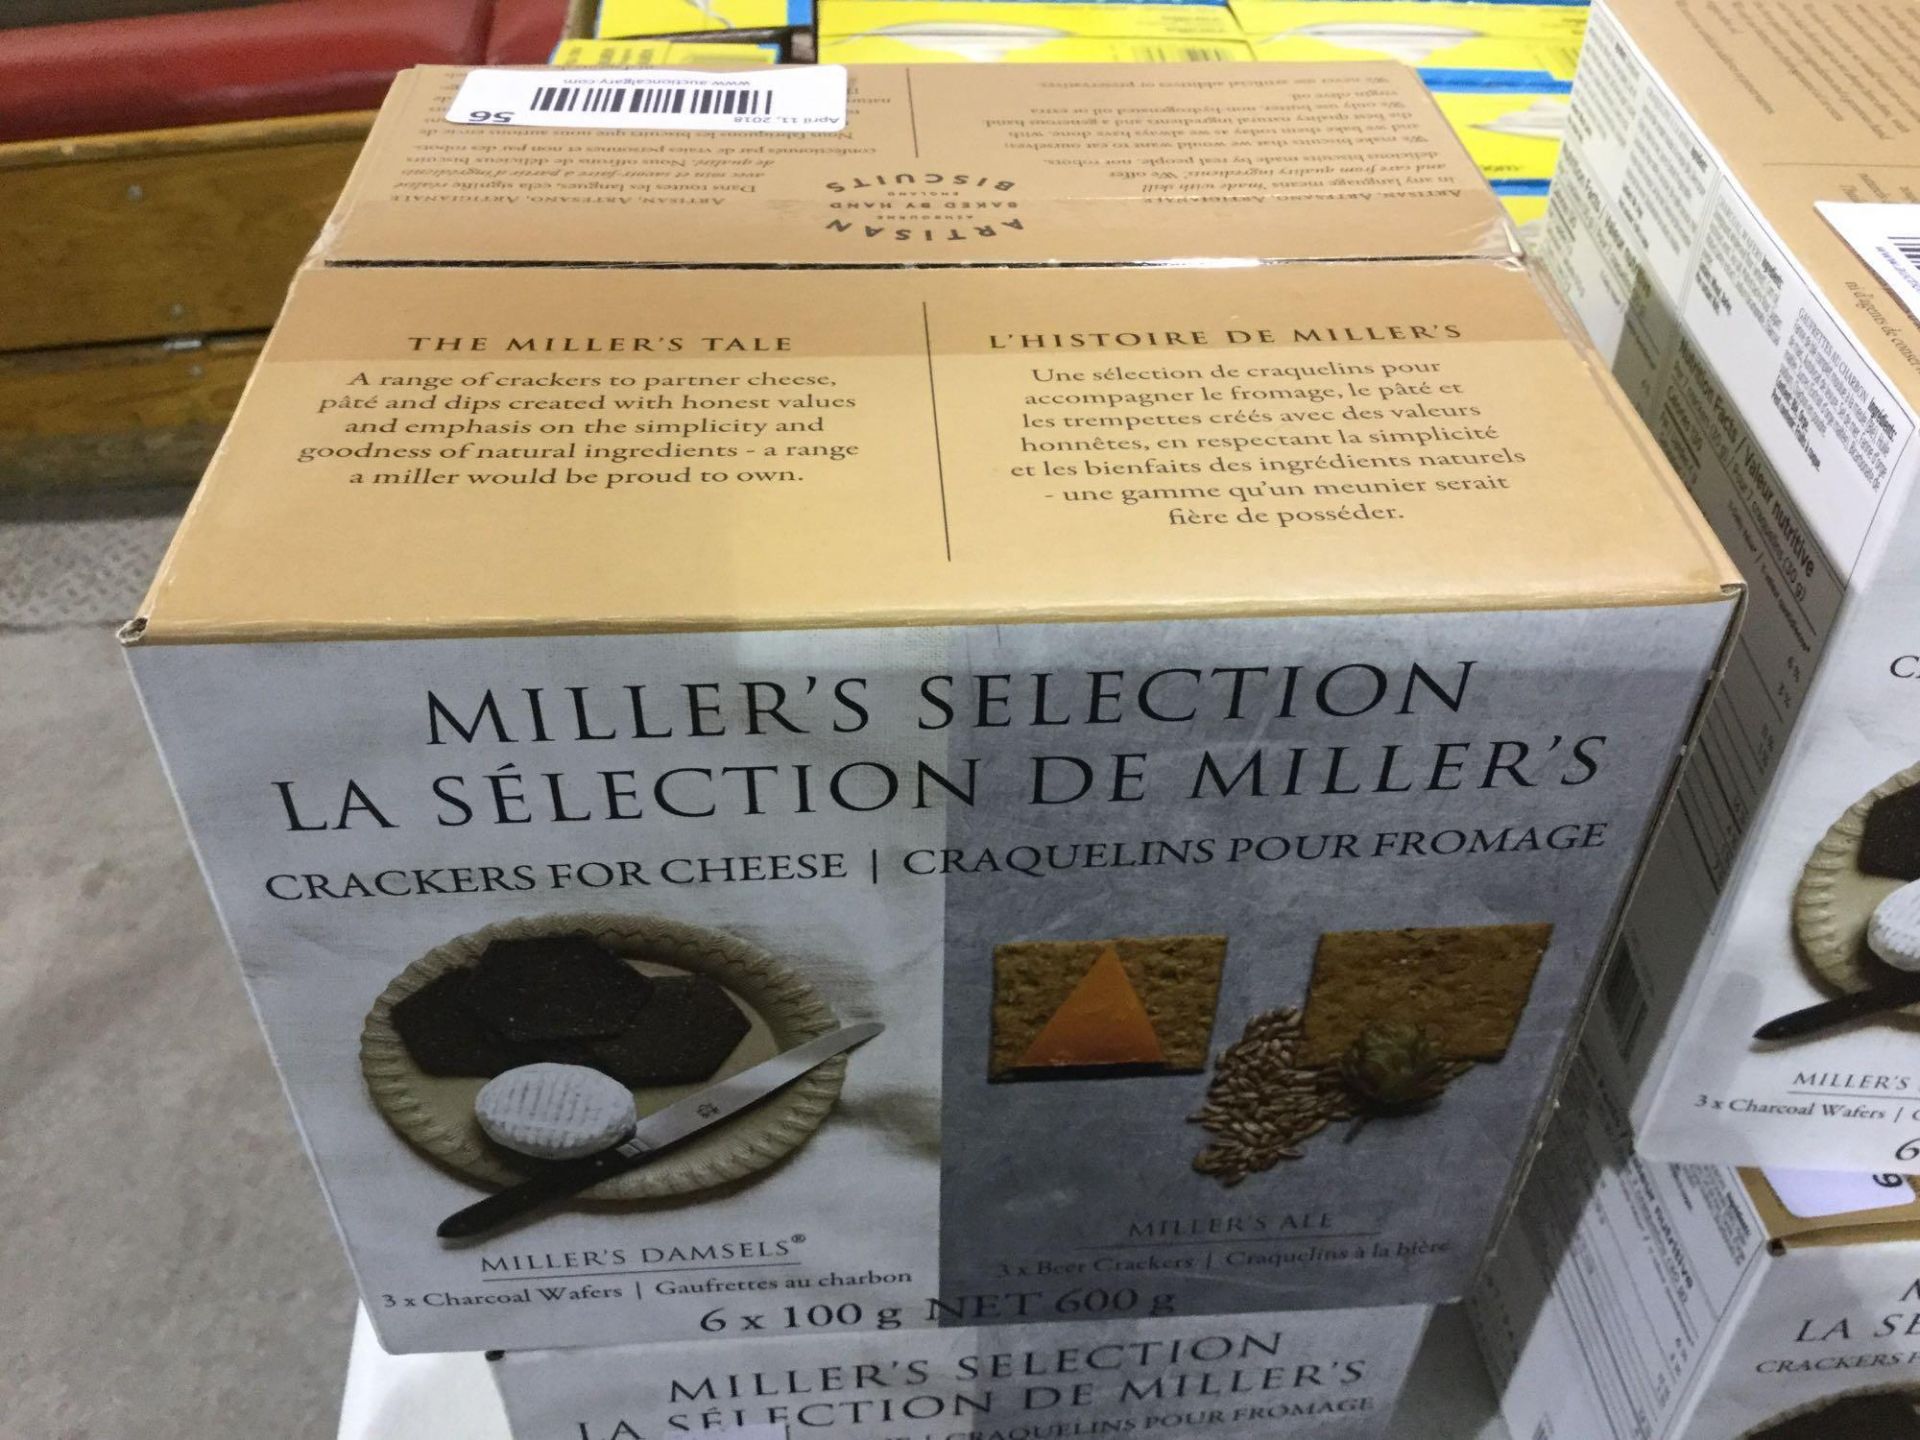 Case of 6 x 100 g Miller's Selected Crackers